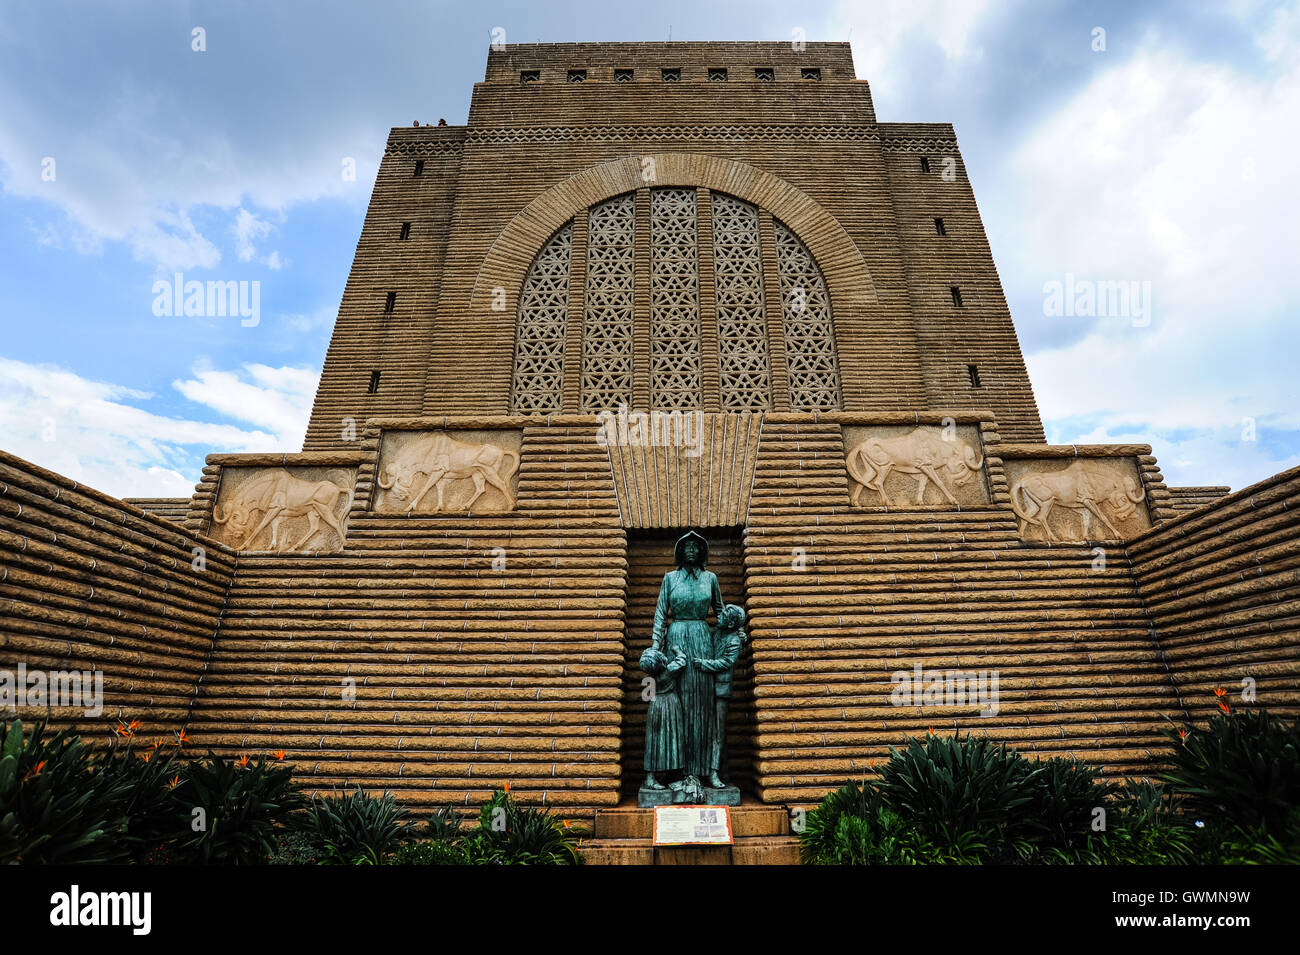 The Voortrekker Monument is situated in Pretoria, South Africa. Built in memory of the Voortrekkers, pioneers who left the Cape Colony in the thousands between 1835 and 1854. Stock Photo